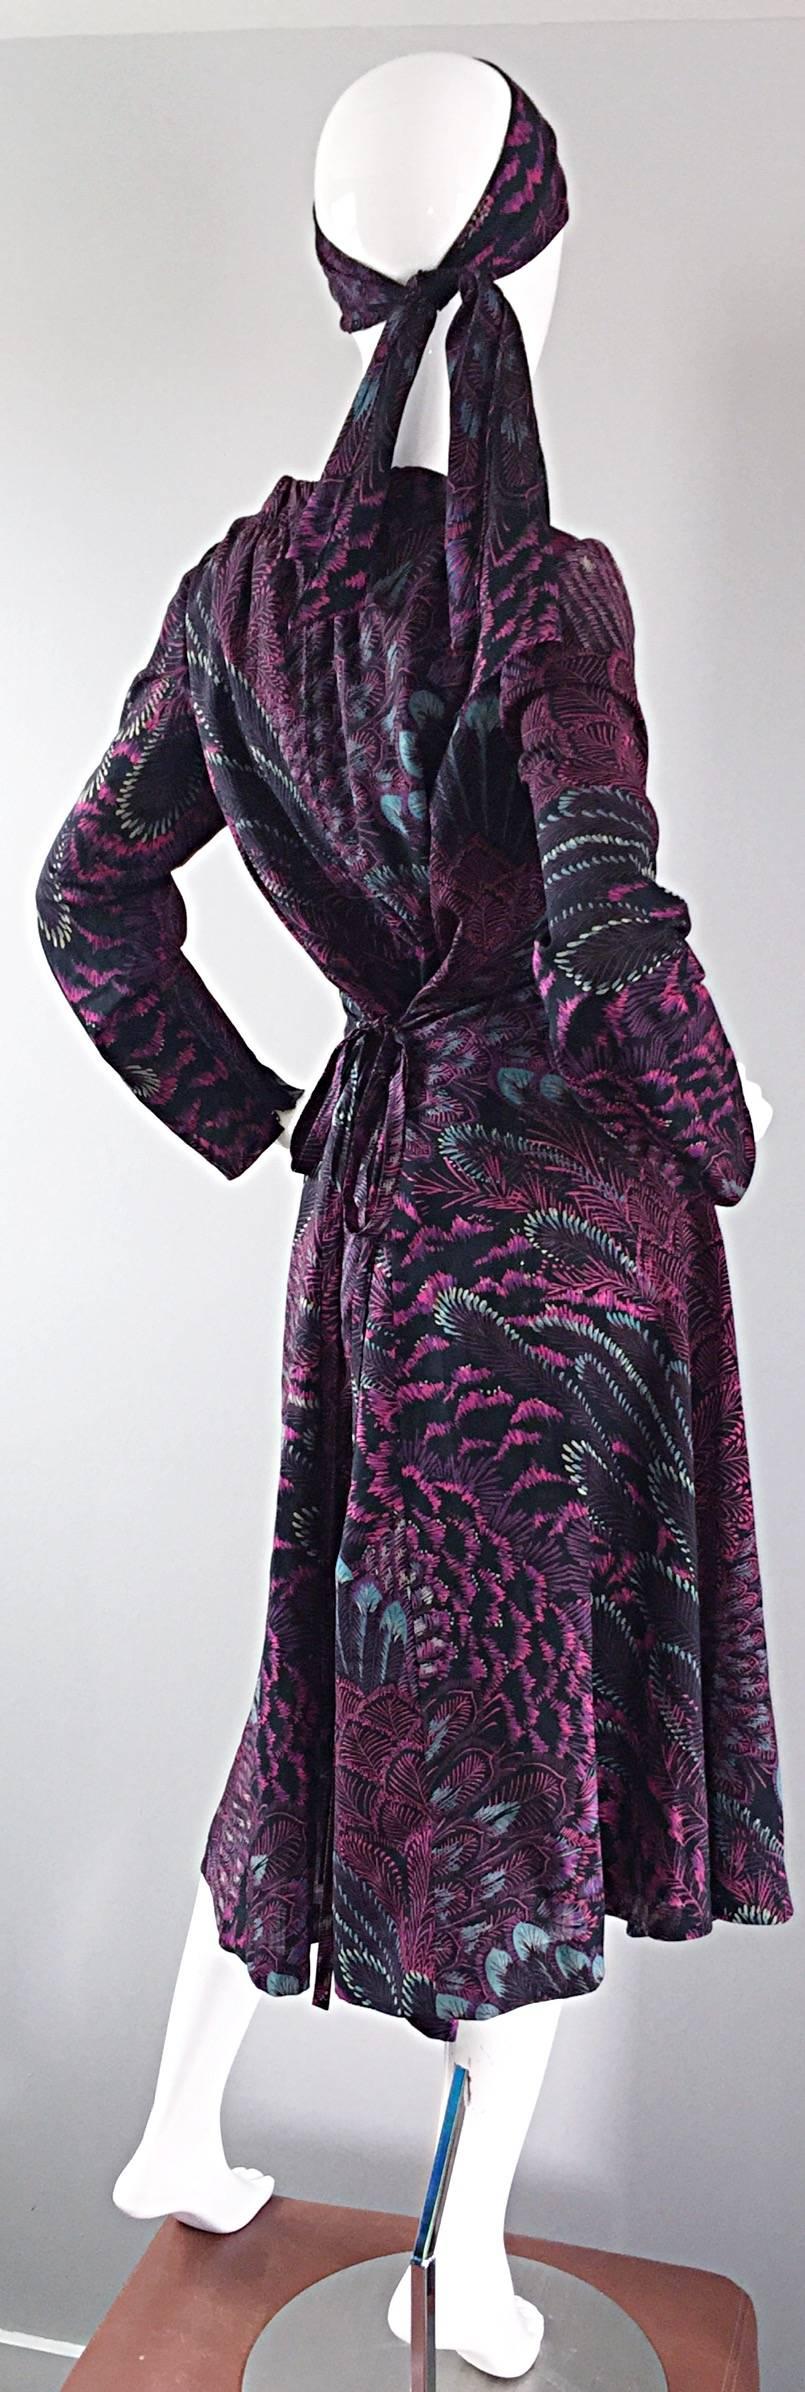 Incredible 1970s Pauline Trigere ' Peacock Feather ' Vintage Dress & Head Scarf 3